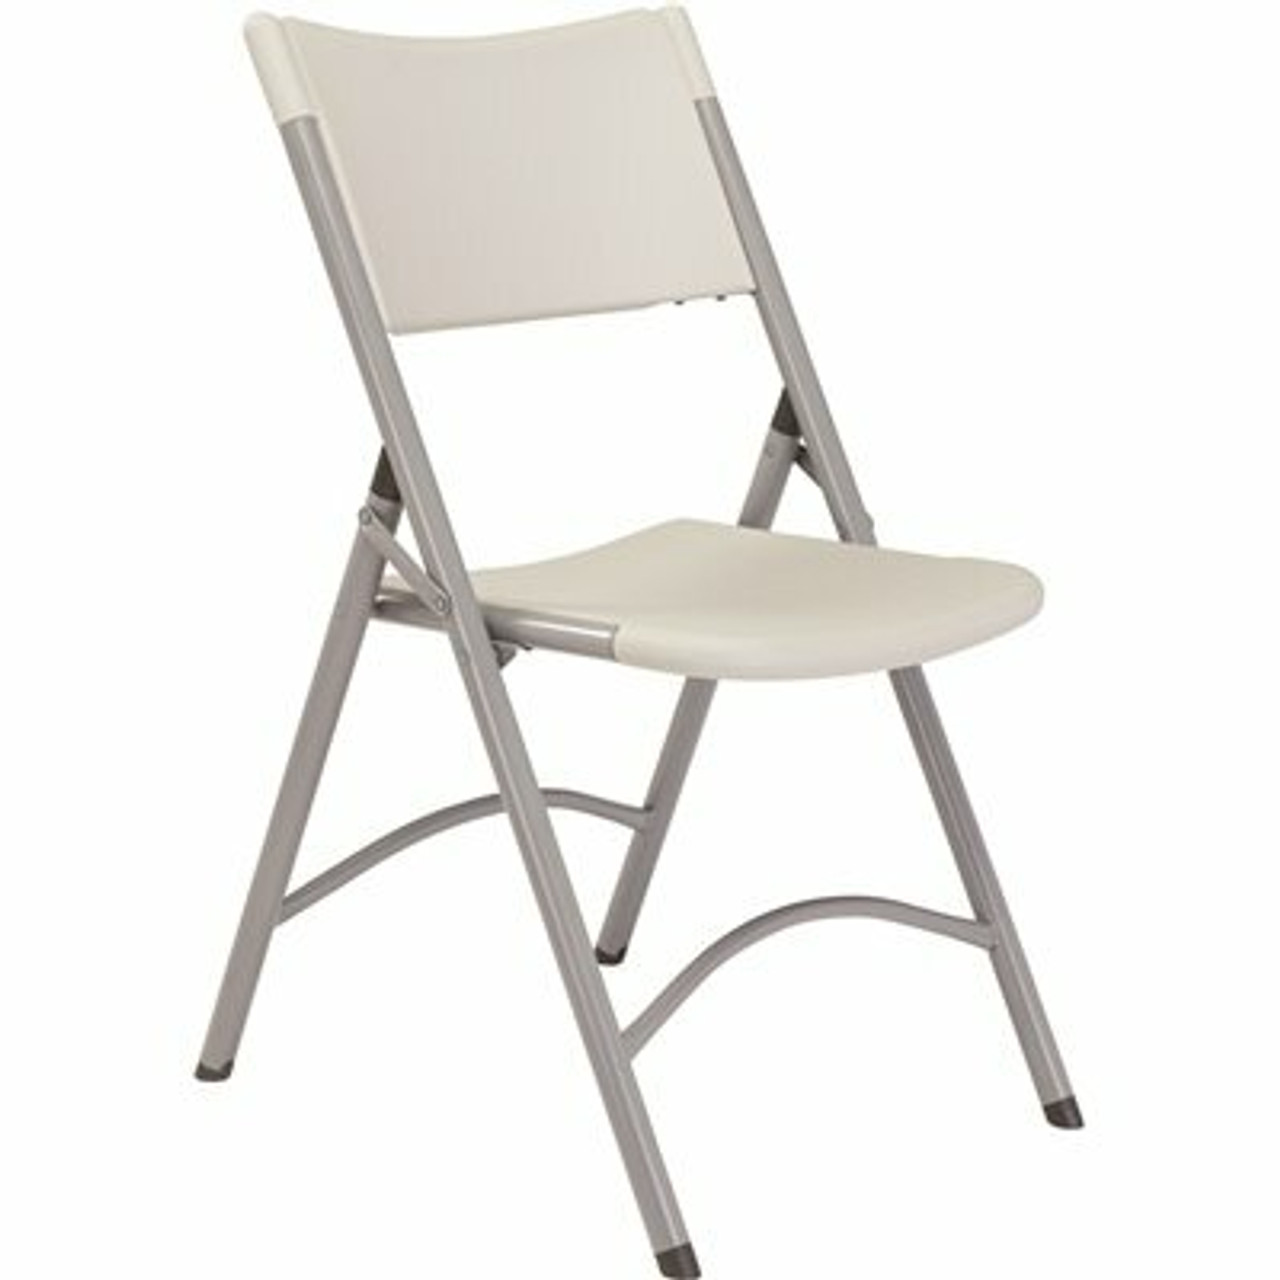 National Public Seating Grey Plastic Seat Outdoor Safe Folding Chair (Set Of 4)